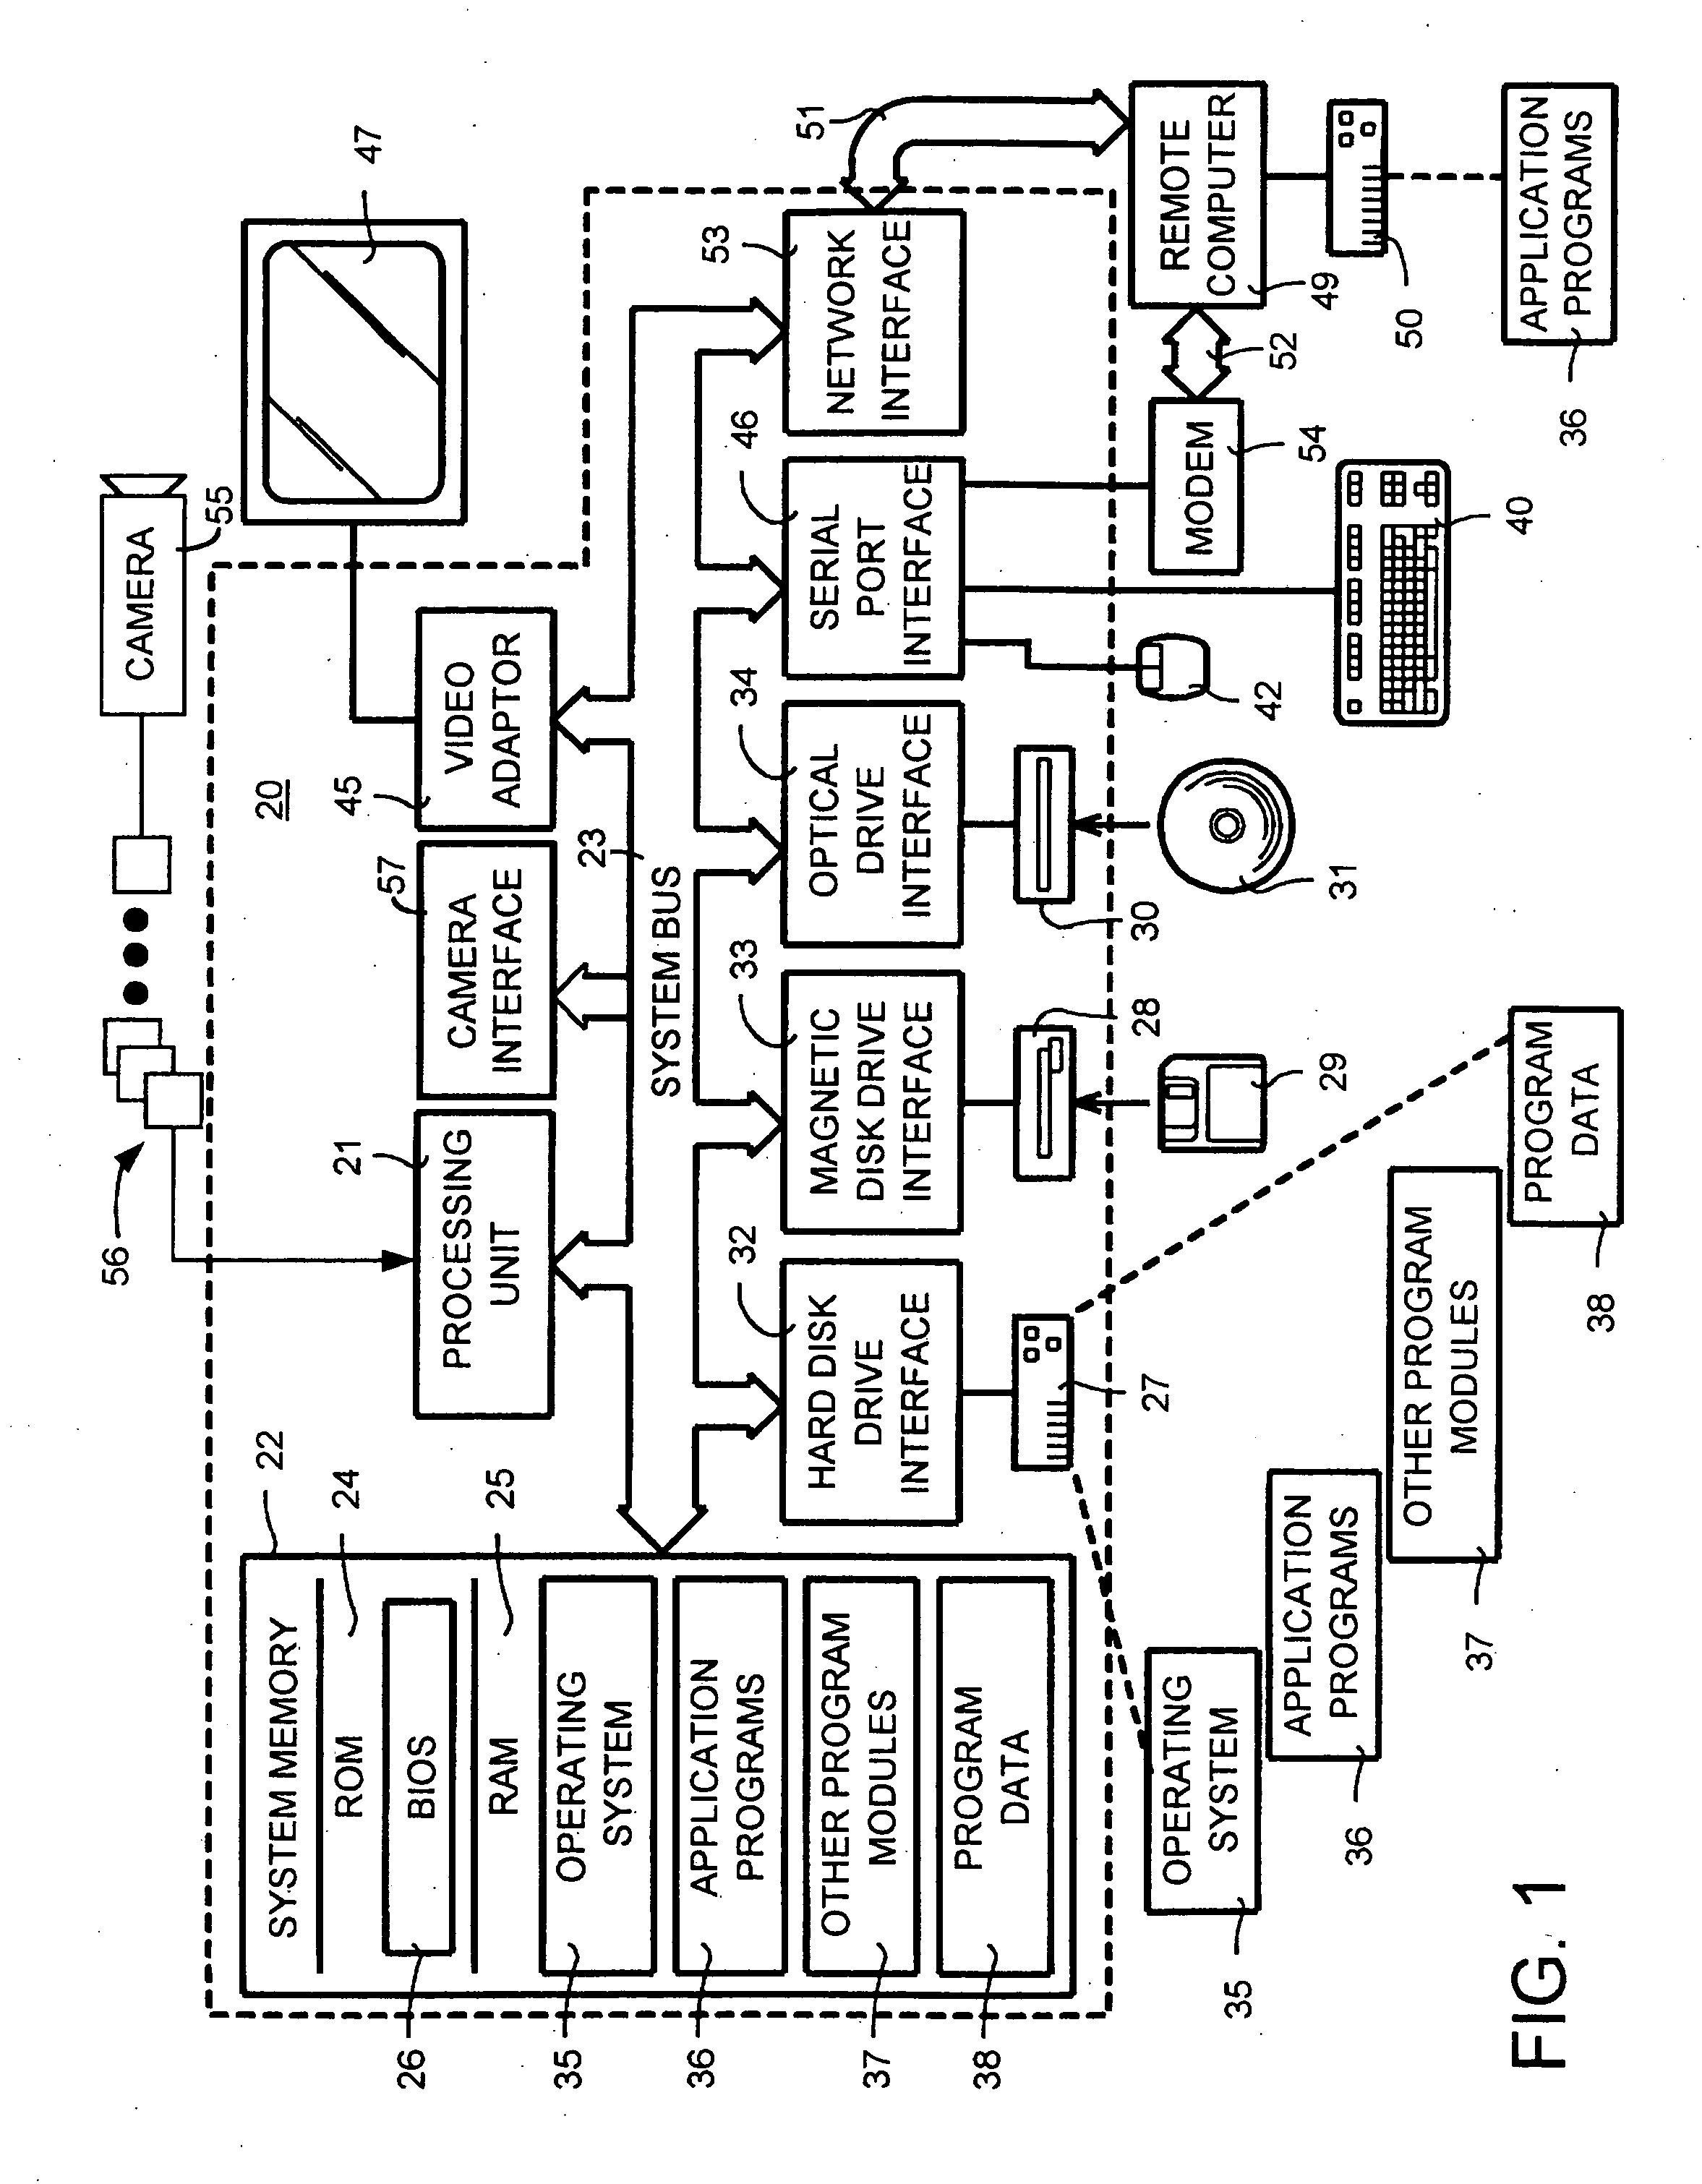 Pose-invariant face recognition system and process